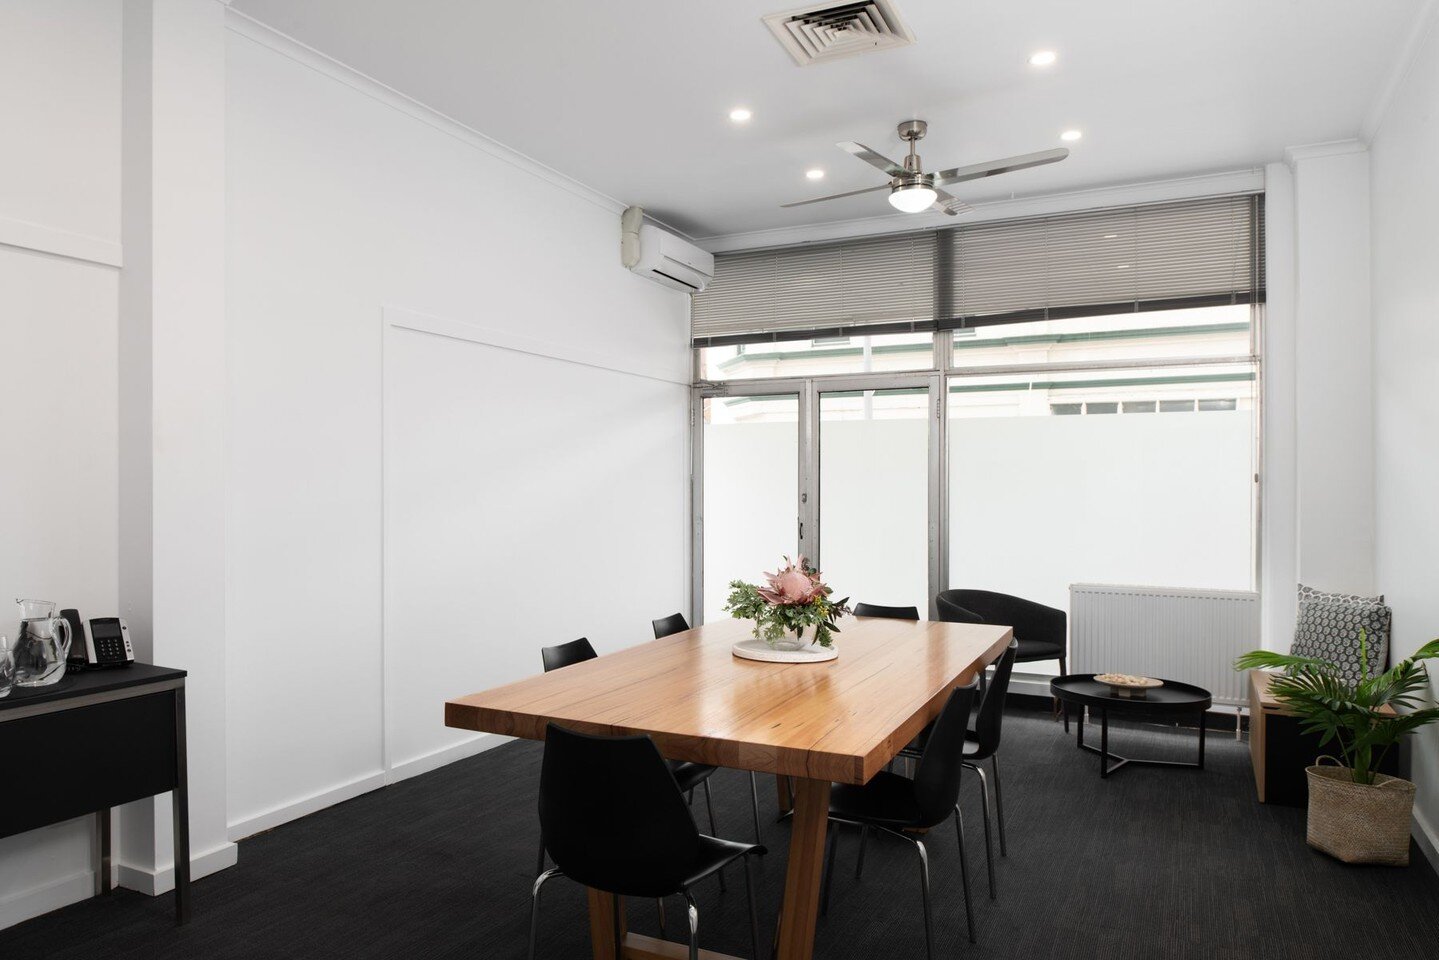 Take the stress out of planning your next meeting by hiring the perfect meeting room from our range of professional and well-equipped spaces. You won't regret it! 

#meetingrooms #launceston #corporate #businesscentre